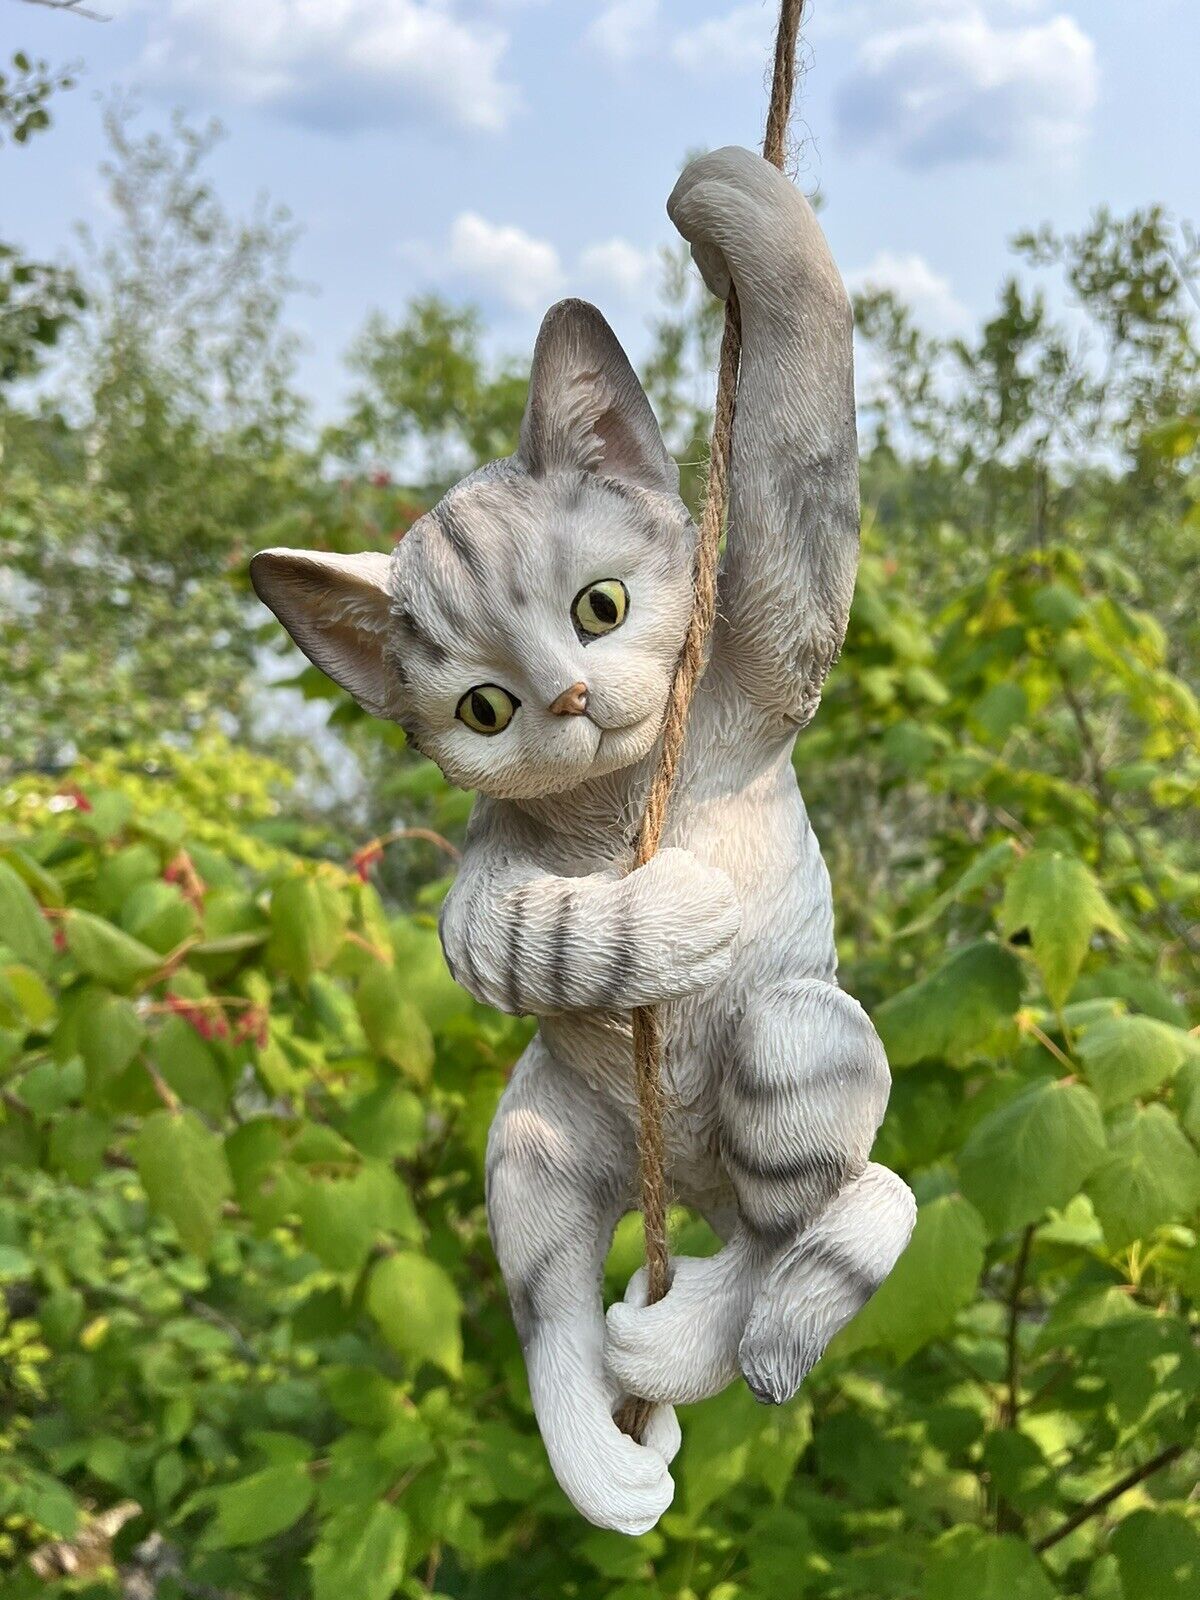 Cat Swinging on a Rope, Playful Kitten Hanging on Swing Out in Garden, Home New